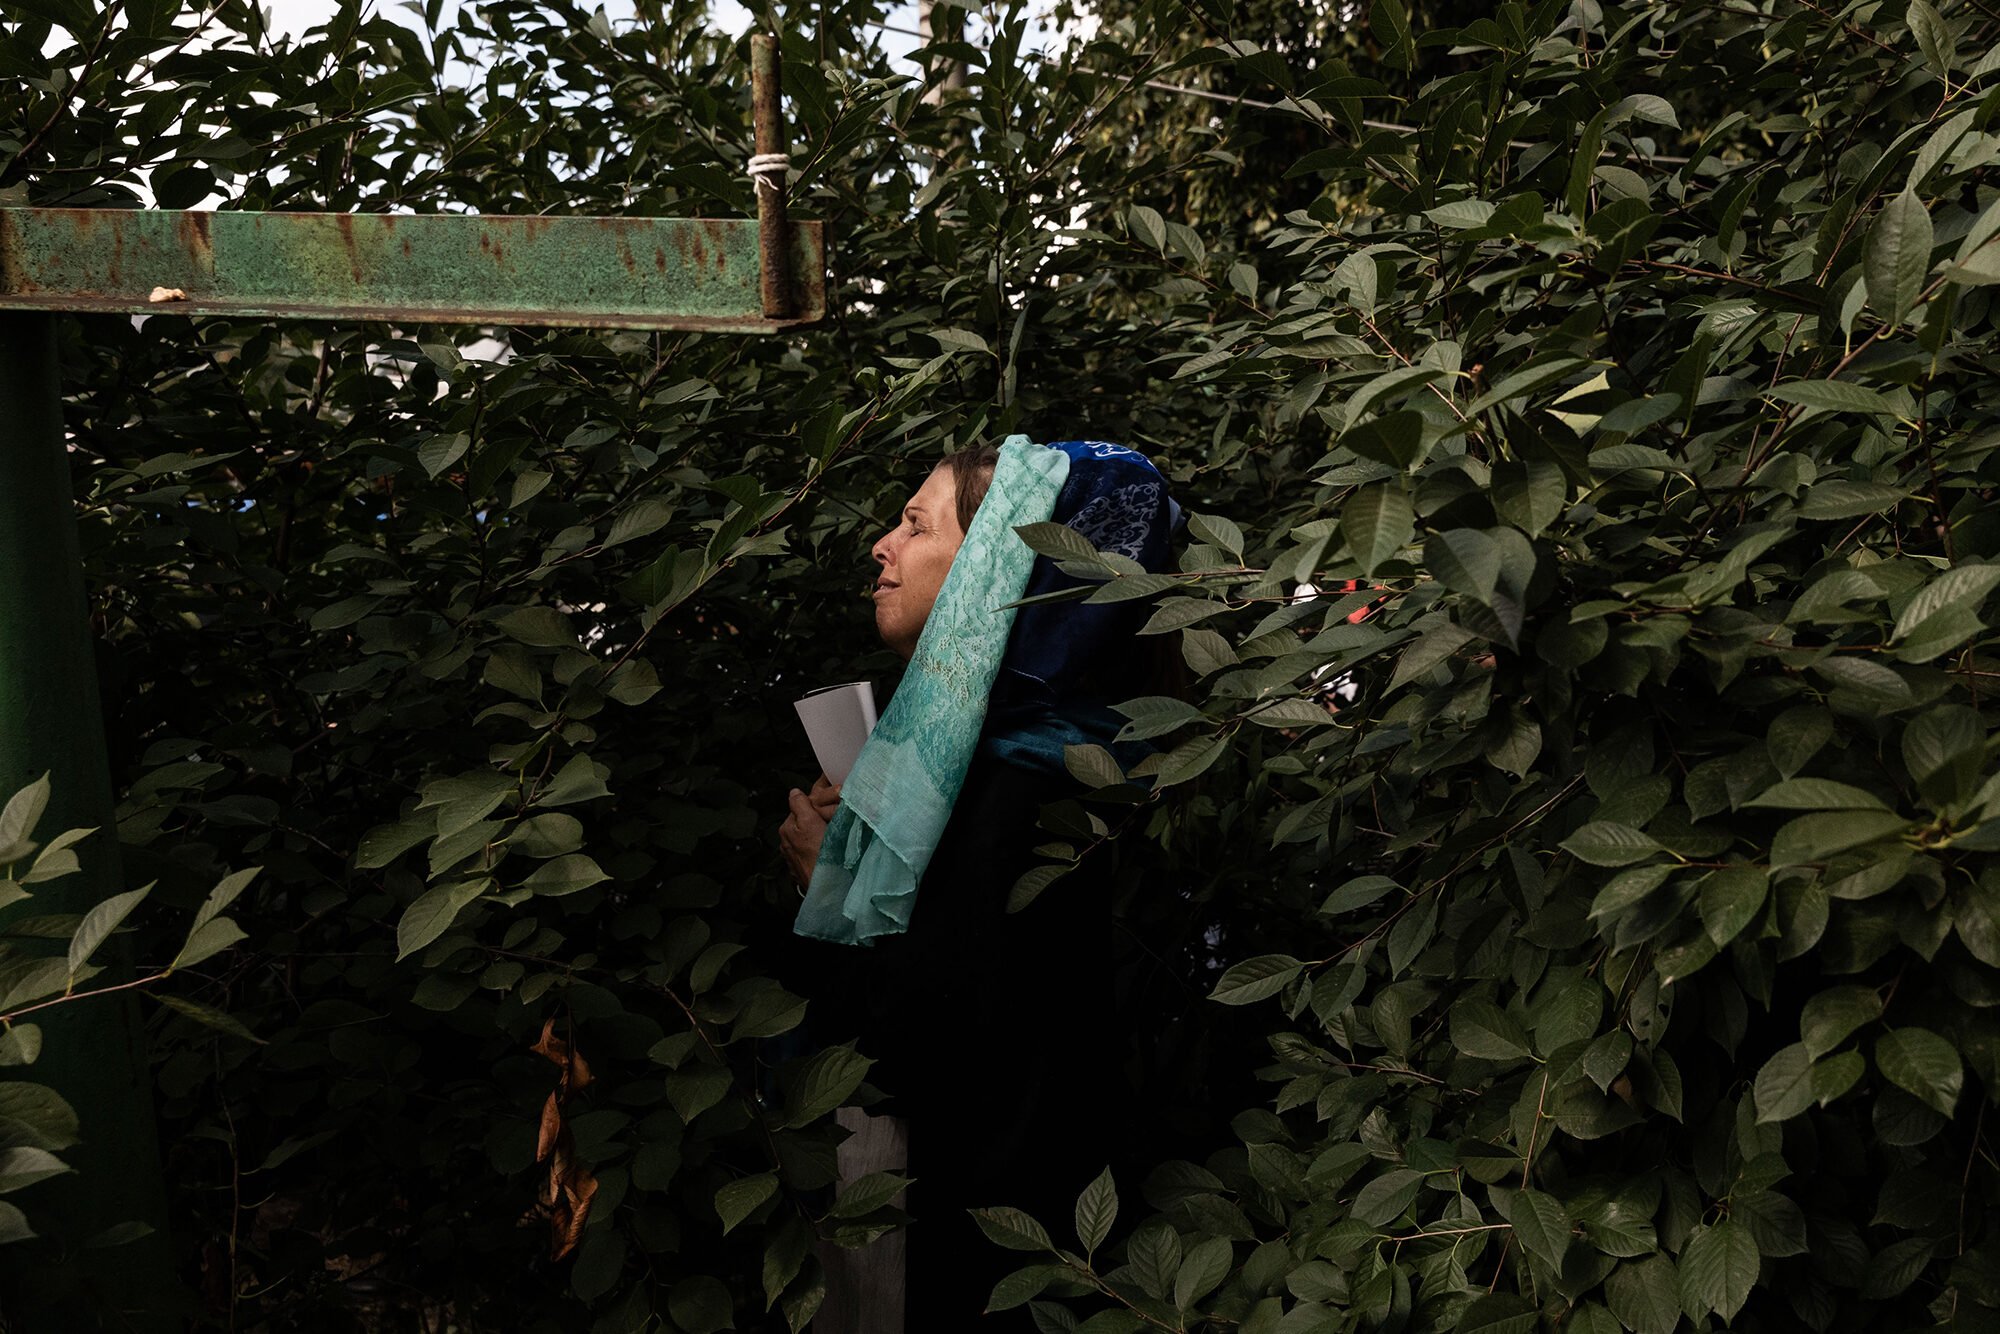 A woman prays in the bushes, the only bit of shade in a Section of a Hasidic Jewish pilgrimage site in Uman, Ukraine.